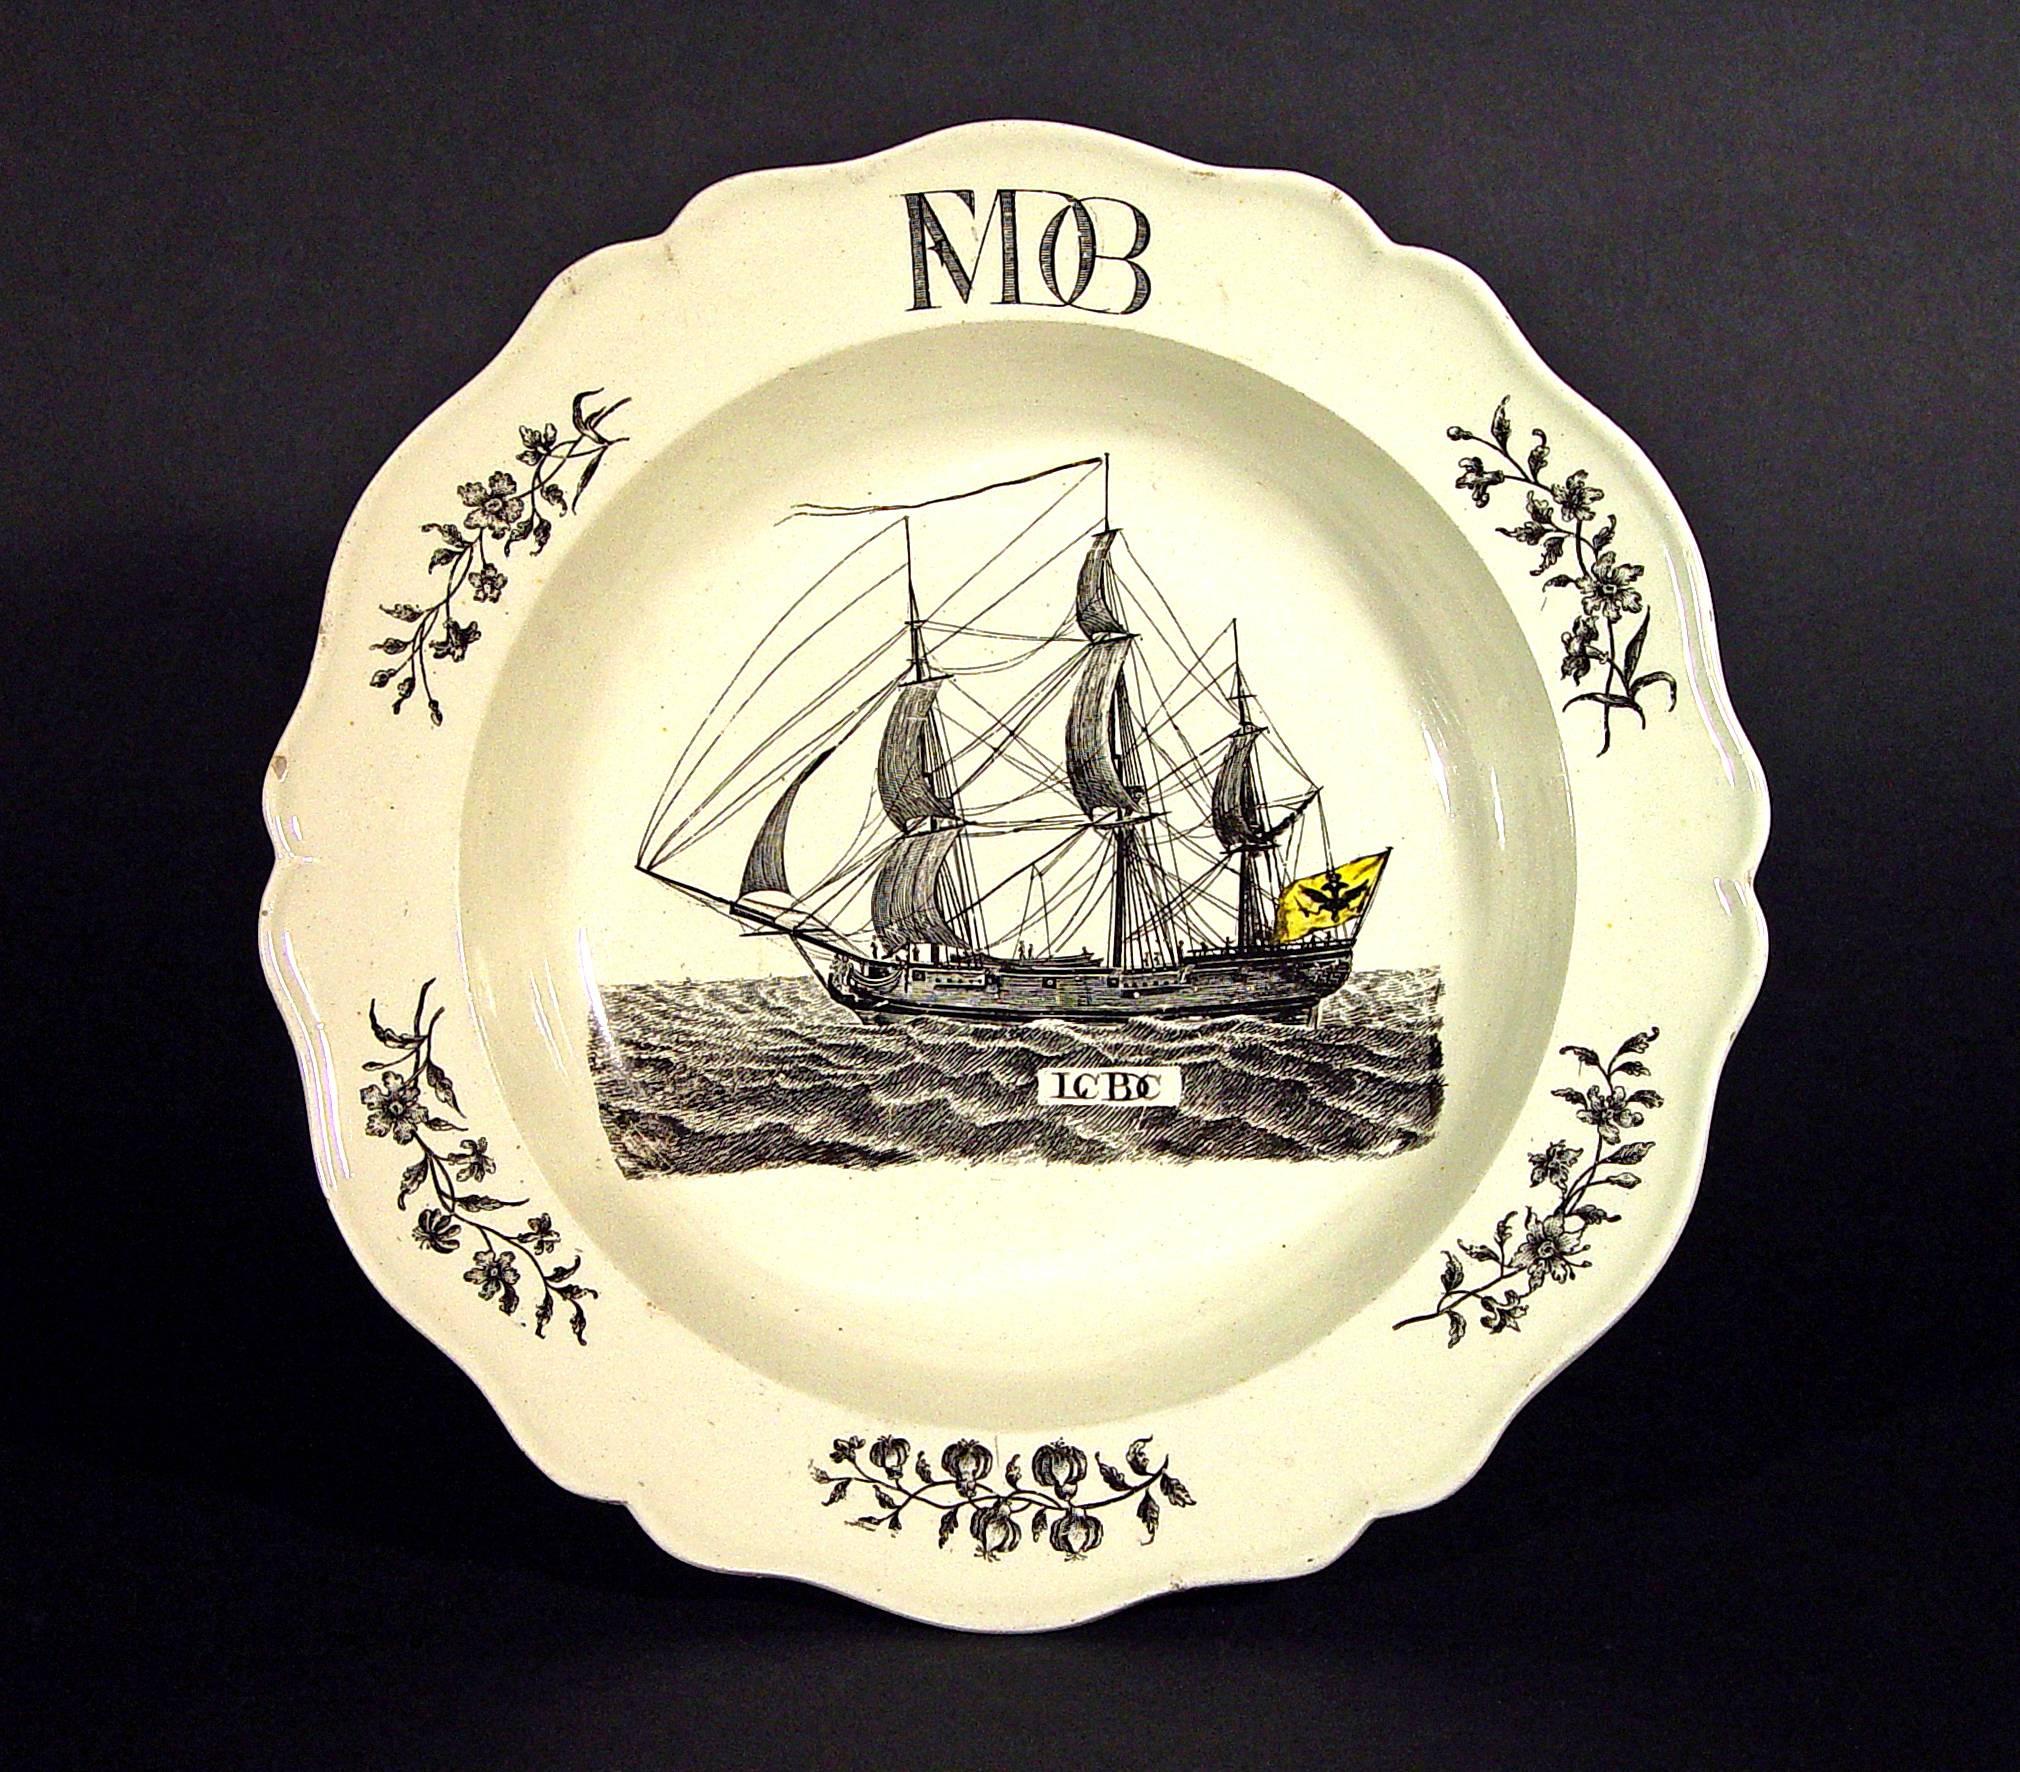 The ship is flying the flag of the last German Emperor of the Holy Roman Empire, Francis II ,
Circa 1775-1790.

The rare Wedgwood creamware plate depicts a naval vessel flying the flag of the last German Emperor of the Holy Roman Empire, Francis II